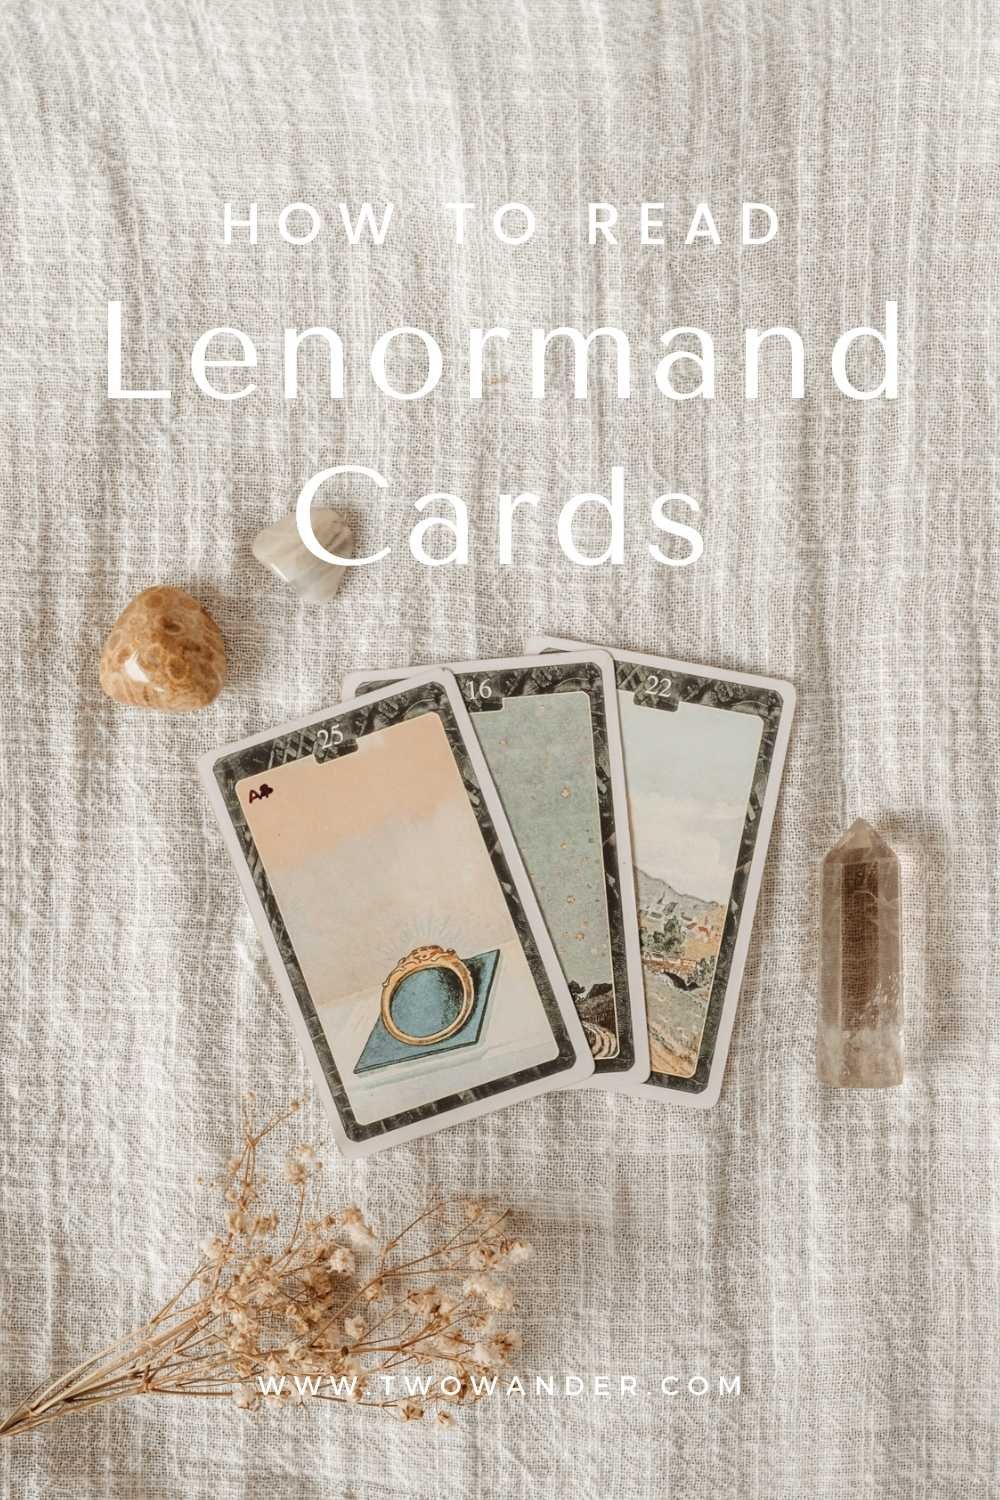 two-wander-how-to-use-lenomarns-cards